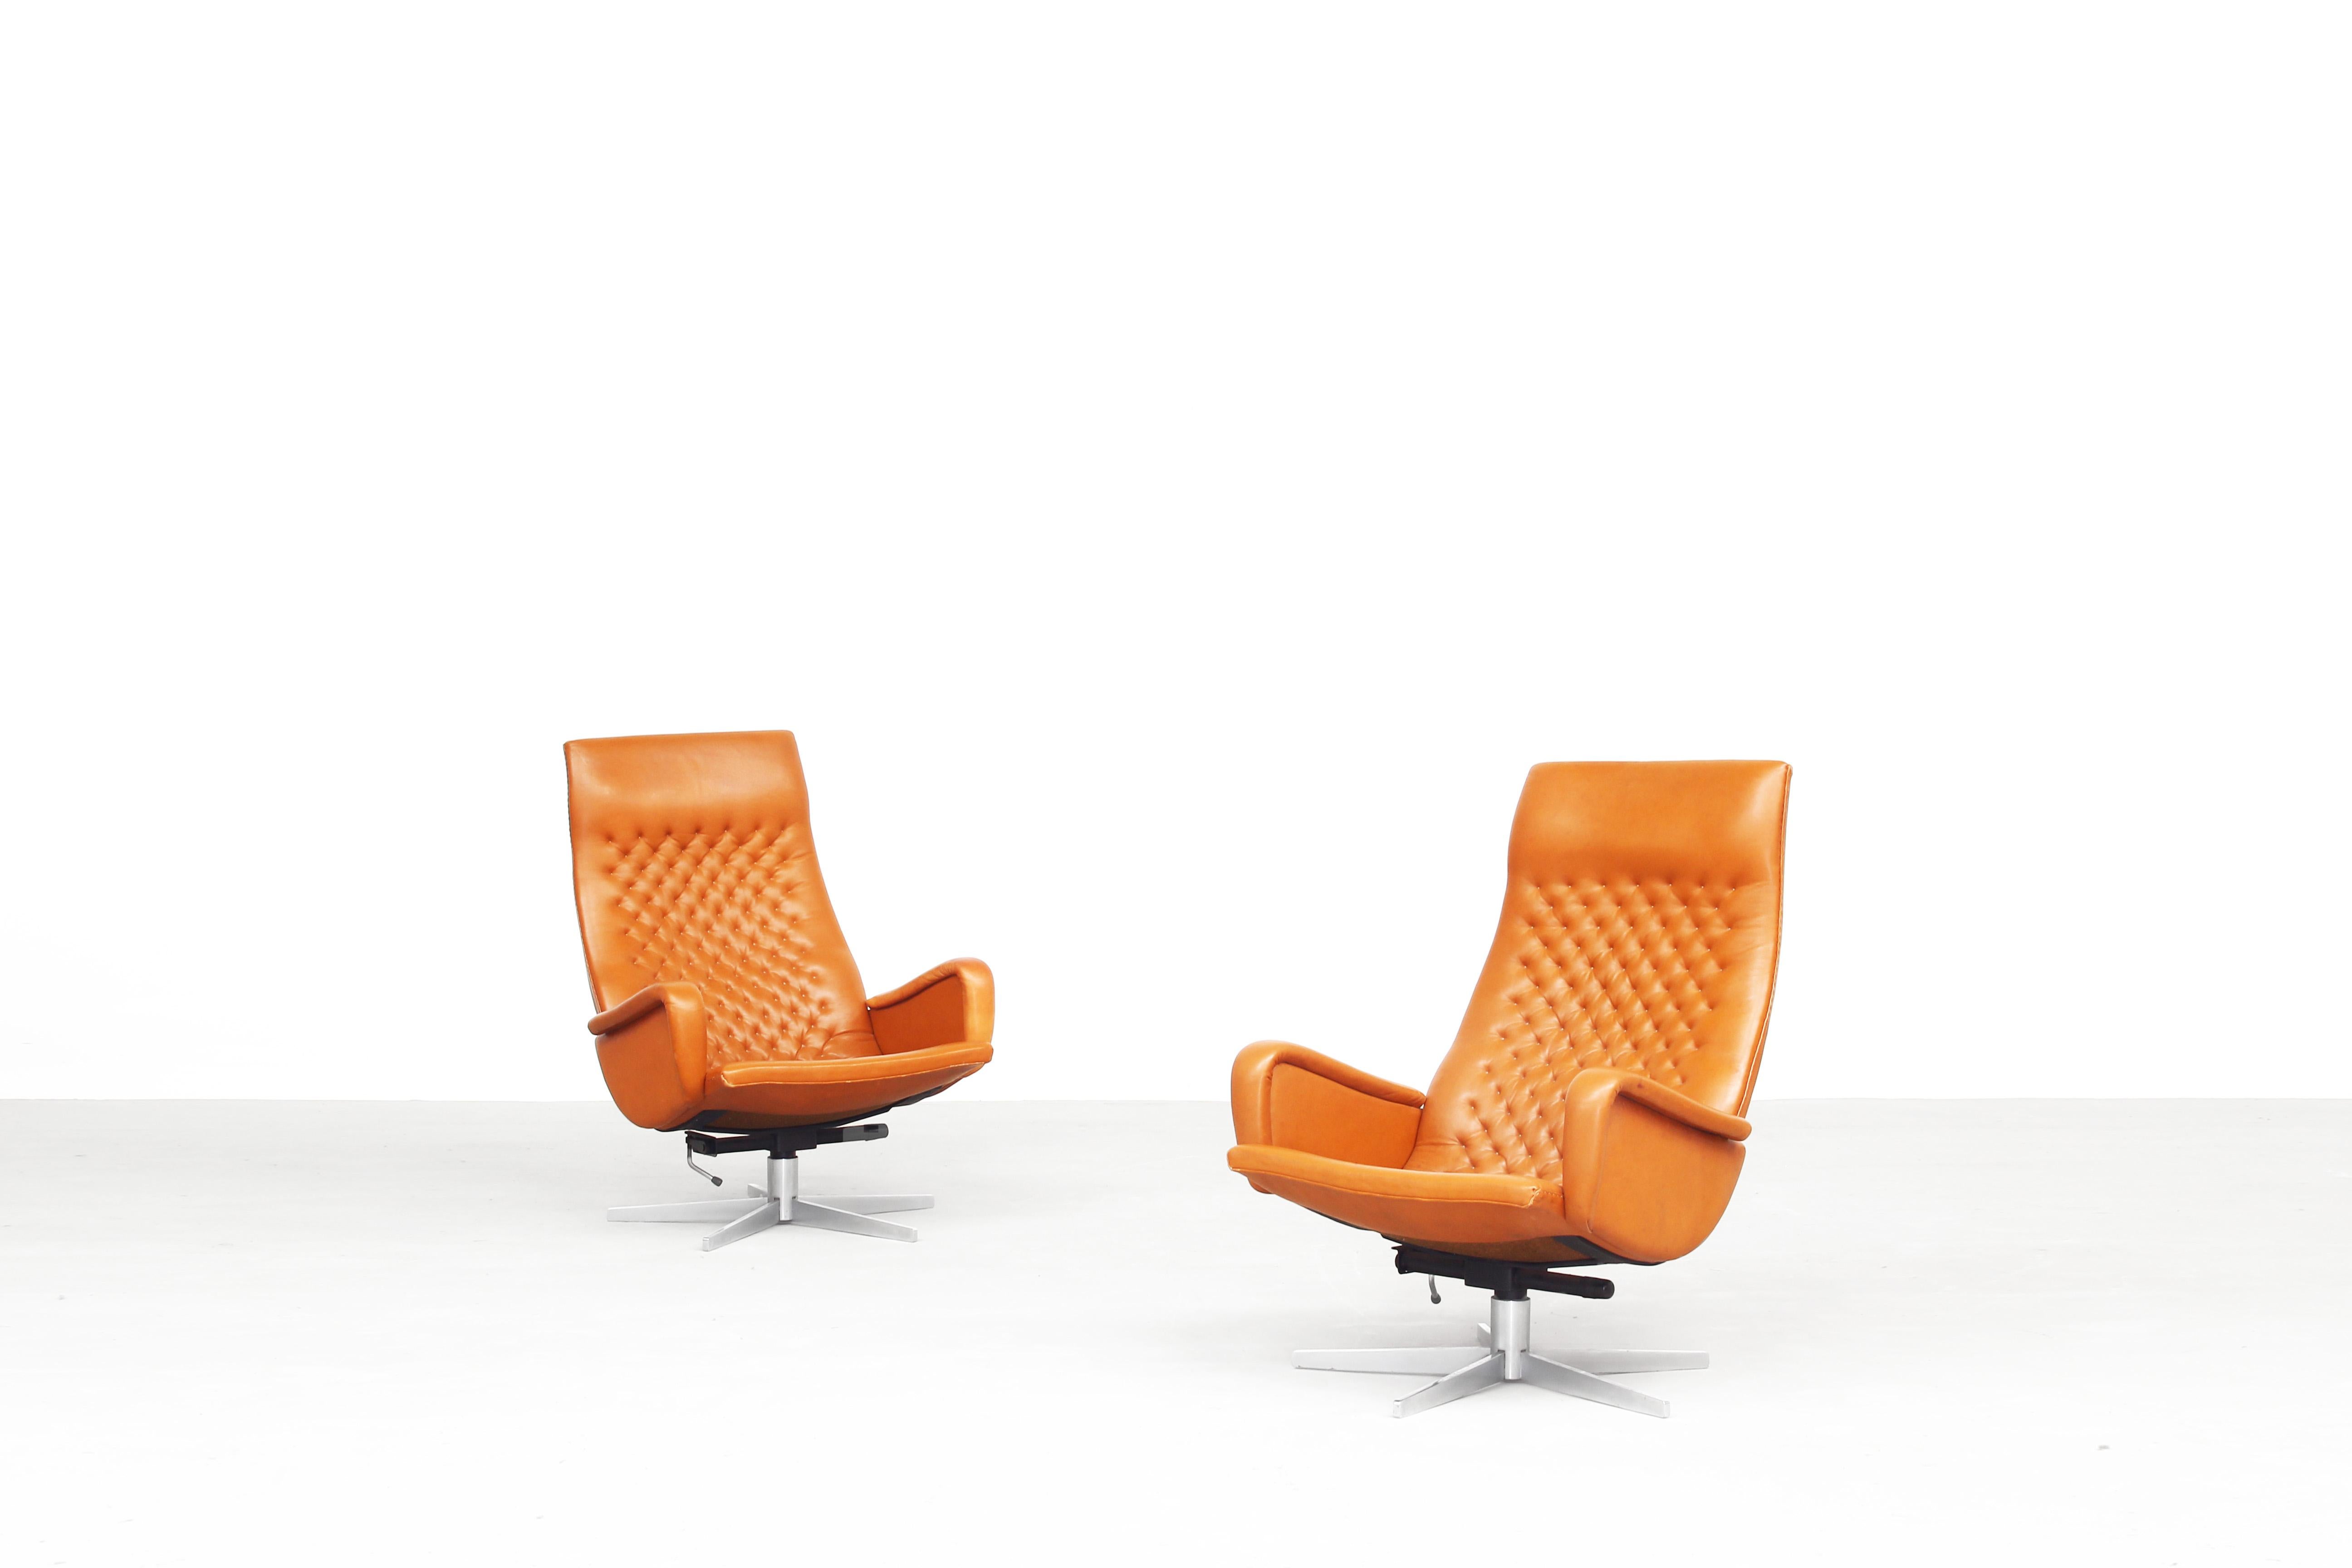 Beautiful pair of lounge chairs produced by De Sede in the late 1970s in Switzerland. Both chairs are in a wonderful condition with just minor wear, without any damages or smell. Made out of steelframe and brown-cognac leather.